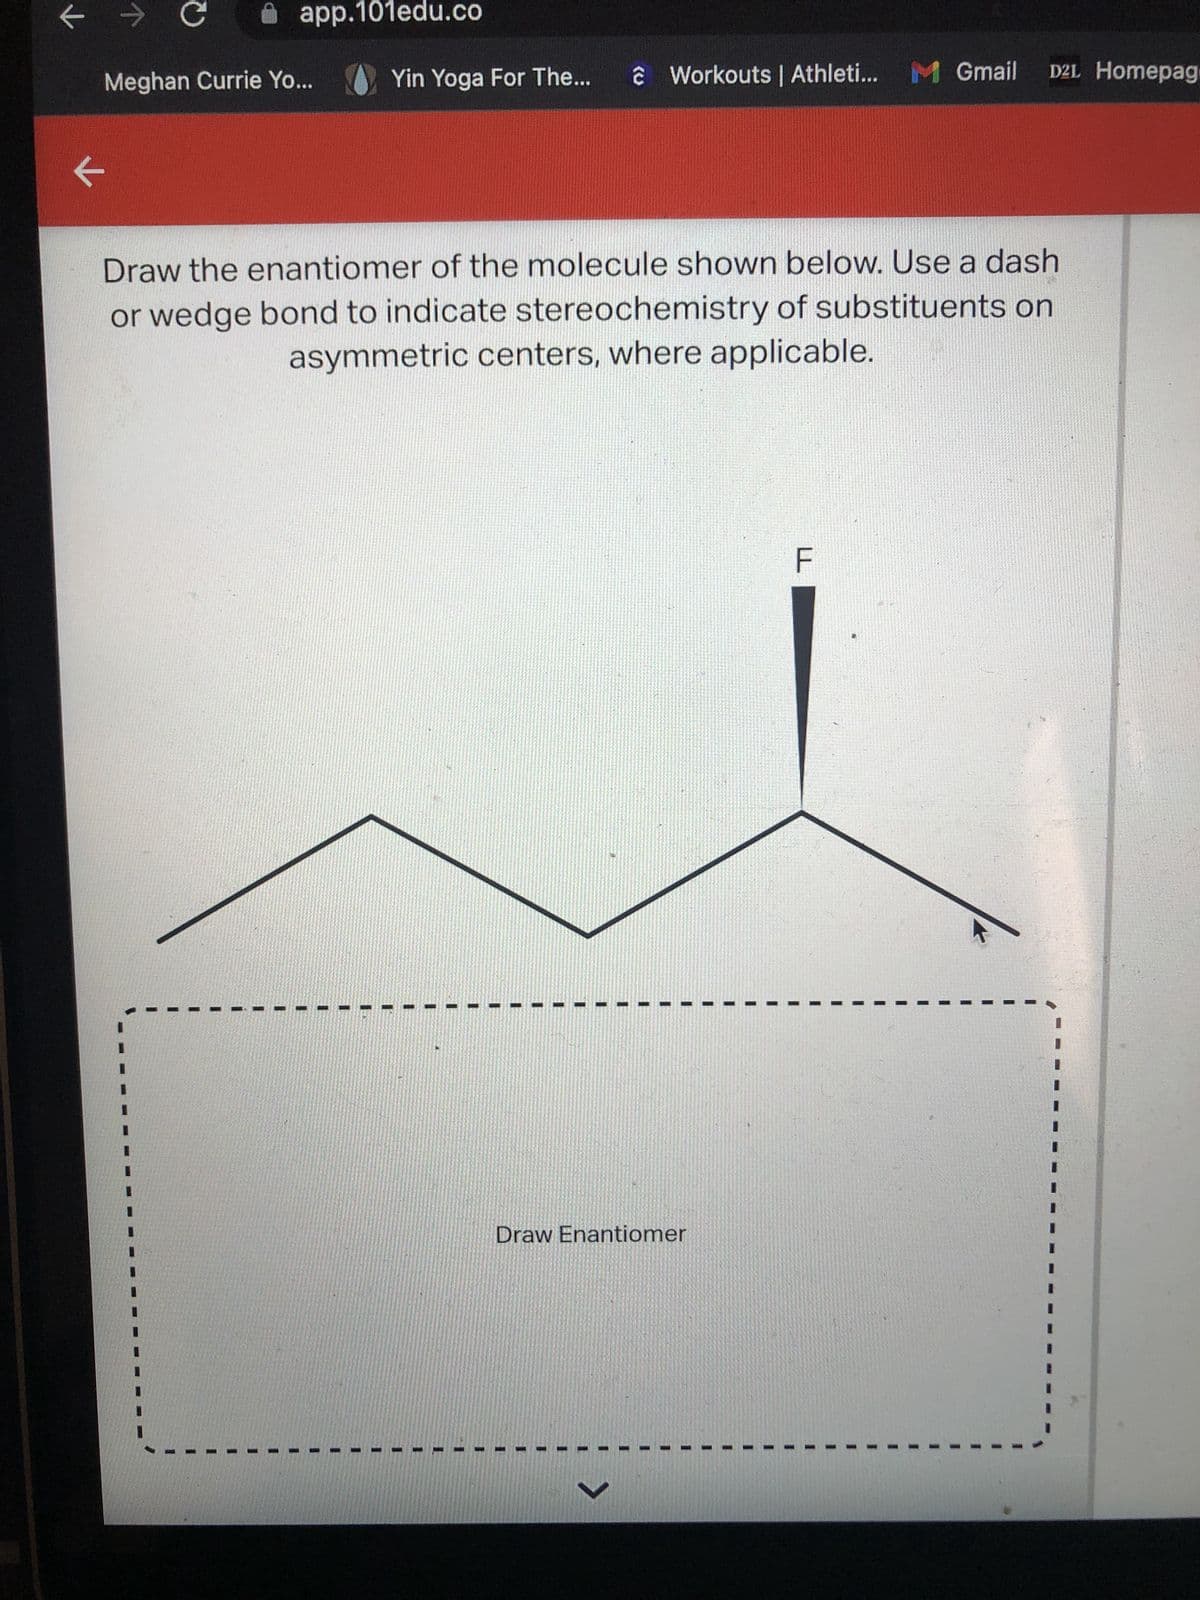 ←
→ C
K
app.101edu.co
Meghan Currie Yo...
Yin Yoga For The...
ĉ Workouts | Athleti... M Gmail D2L Homepag
Draw the enantiomer of the molecule shown below. Use a dash
or wedge bond to indicate stereochemistry of substituents on
asymmetric centers, where applicable.
Draw Enantiomer
F